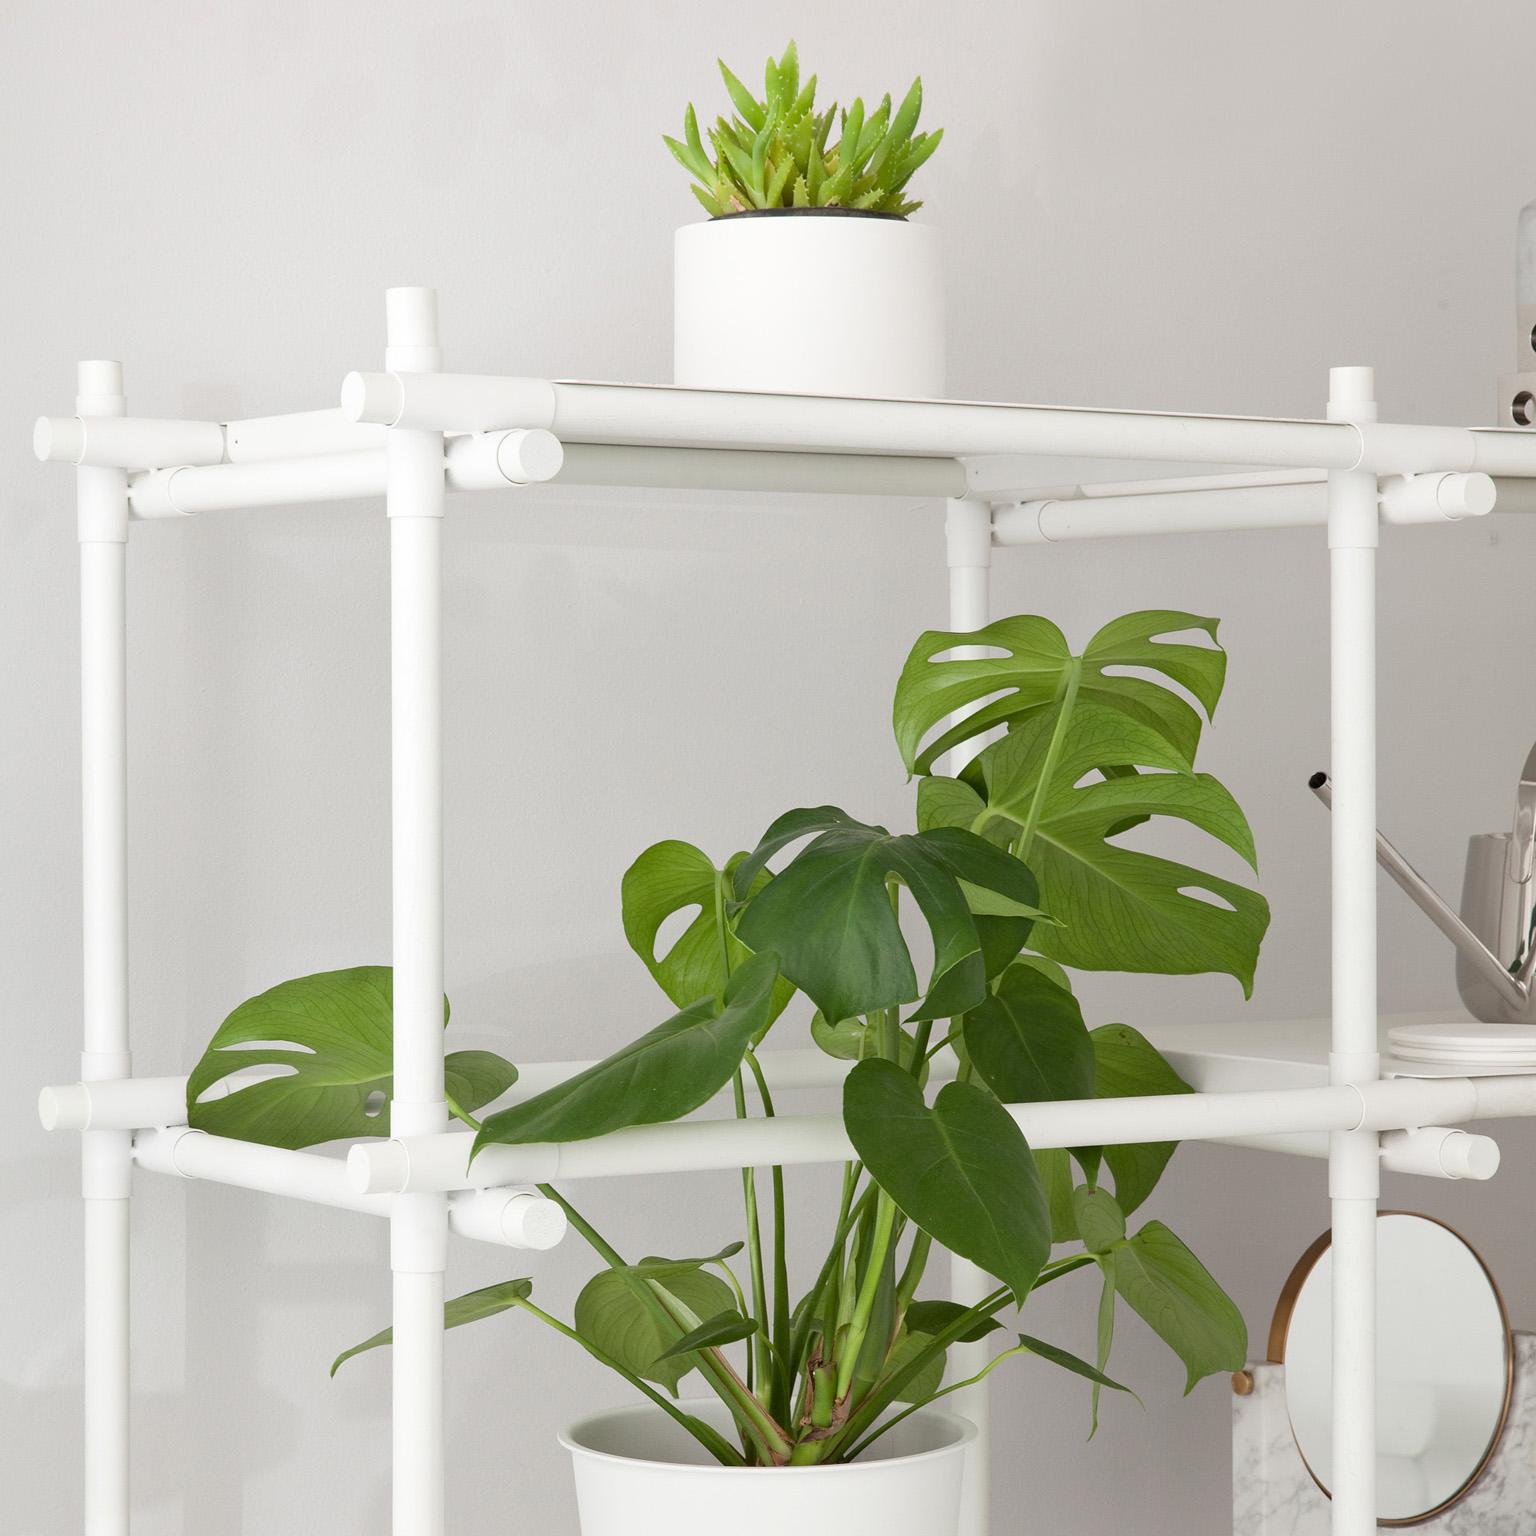 A shelving solution designed to meet the needs of the young generation – mobile and on the move – Stick system can be extended and adapted to suit any space it inhabits. Cleverly designed with maximum attention to detail, it is the creation of